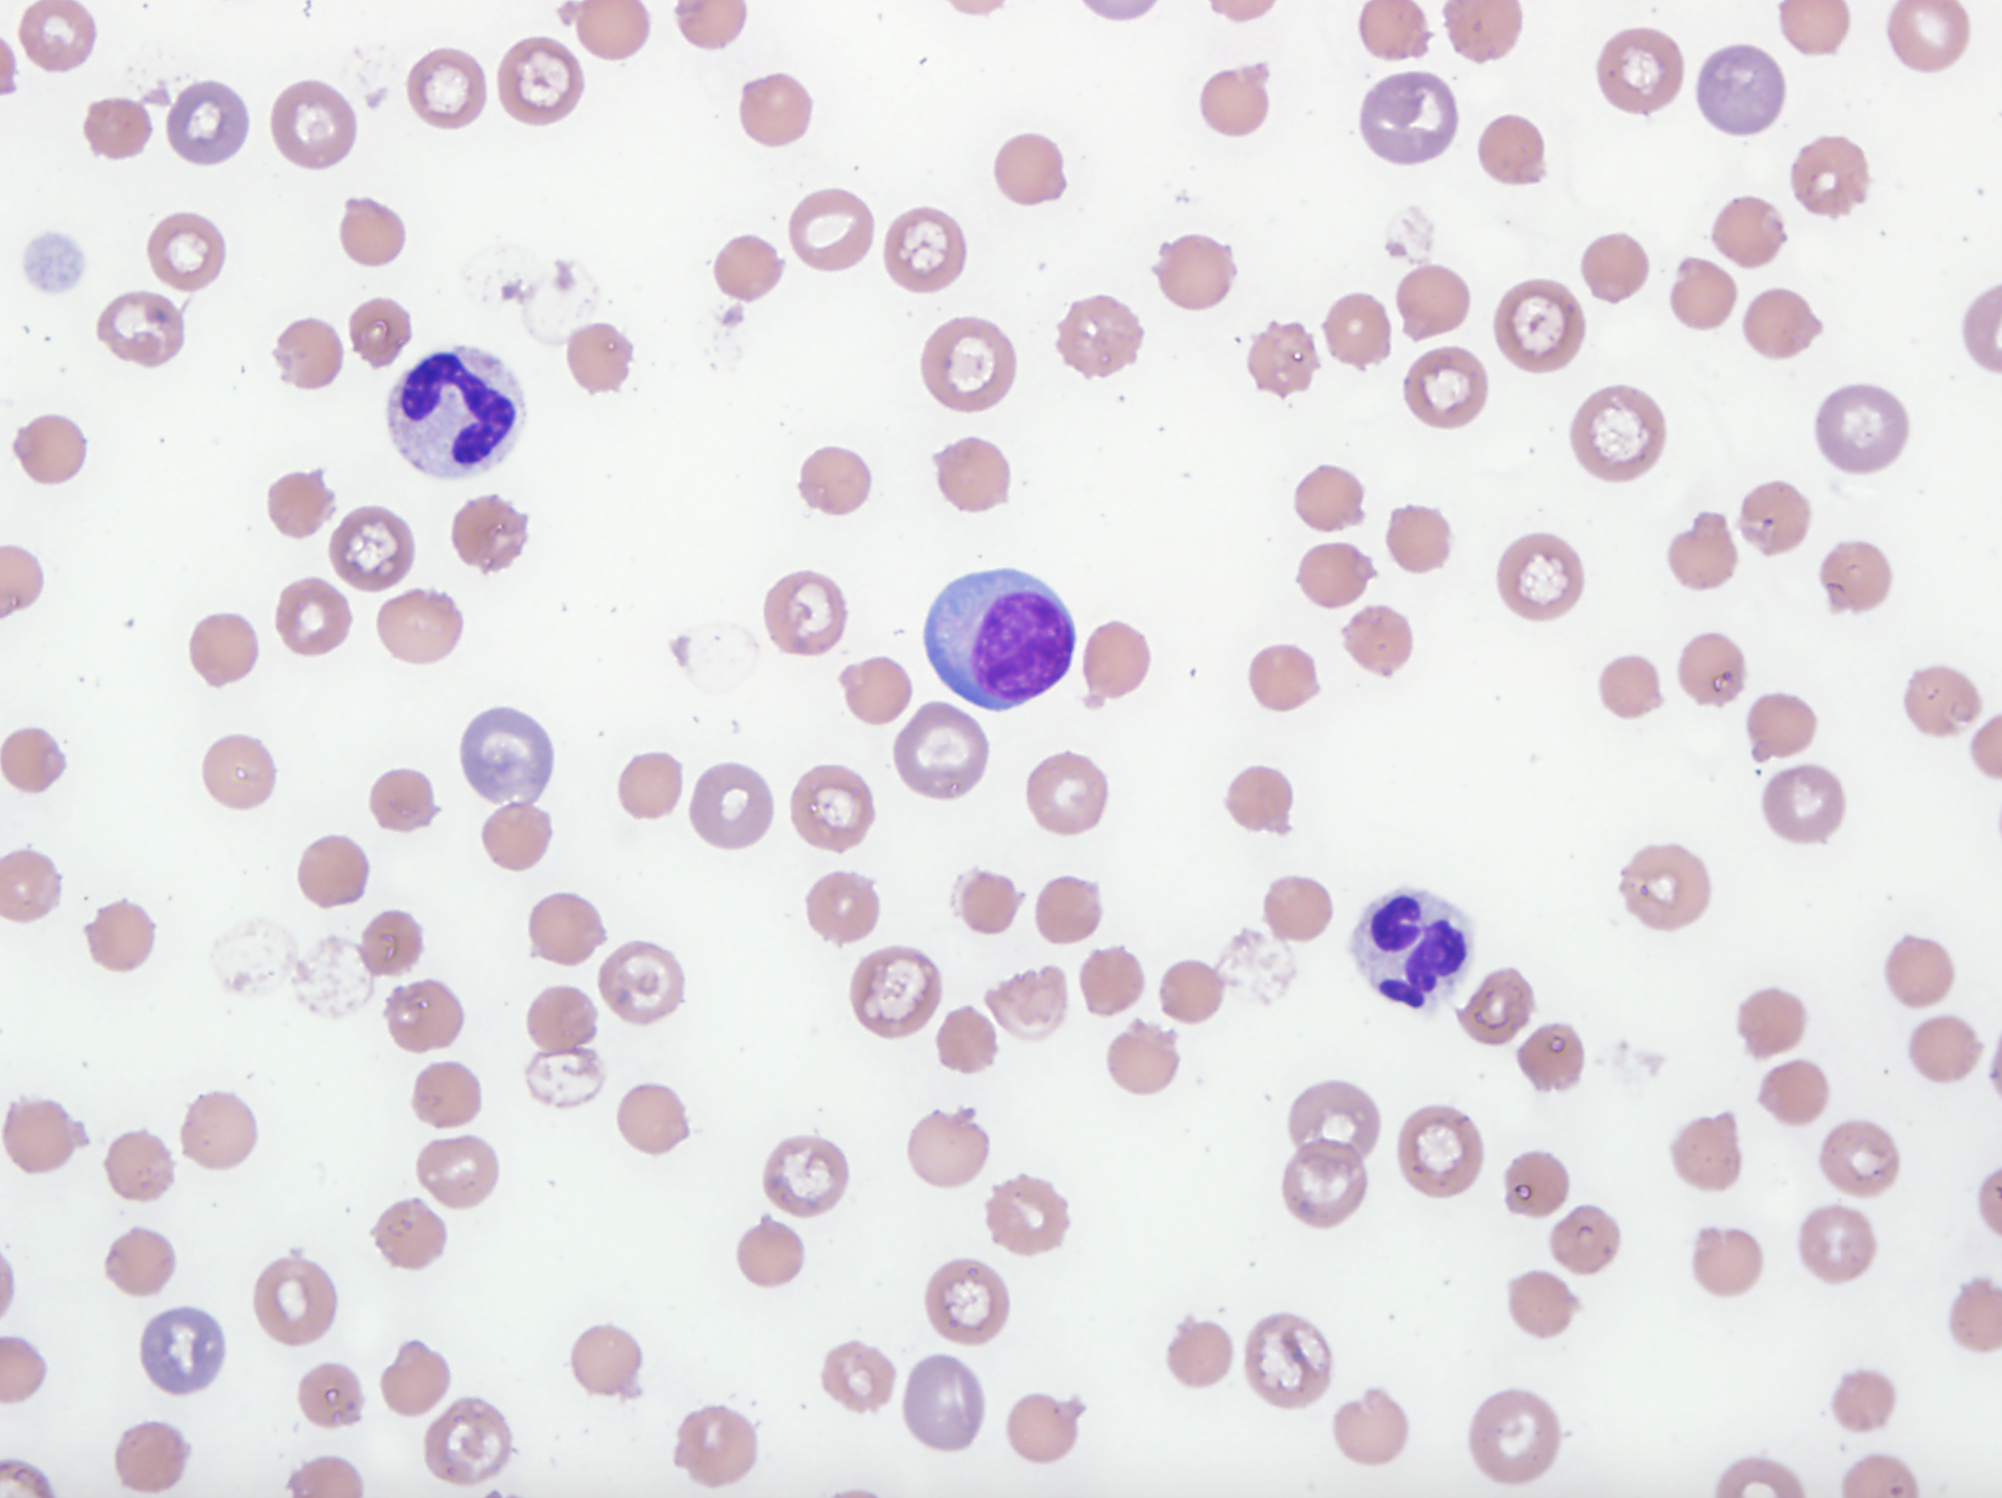 Blood smear showing moderate numbers of Heinz bodies and red blood cell ghosts were seen, indicating Heinz body hemolytic anemia.